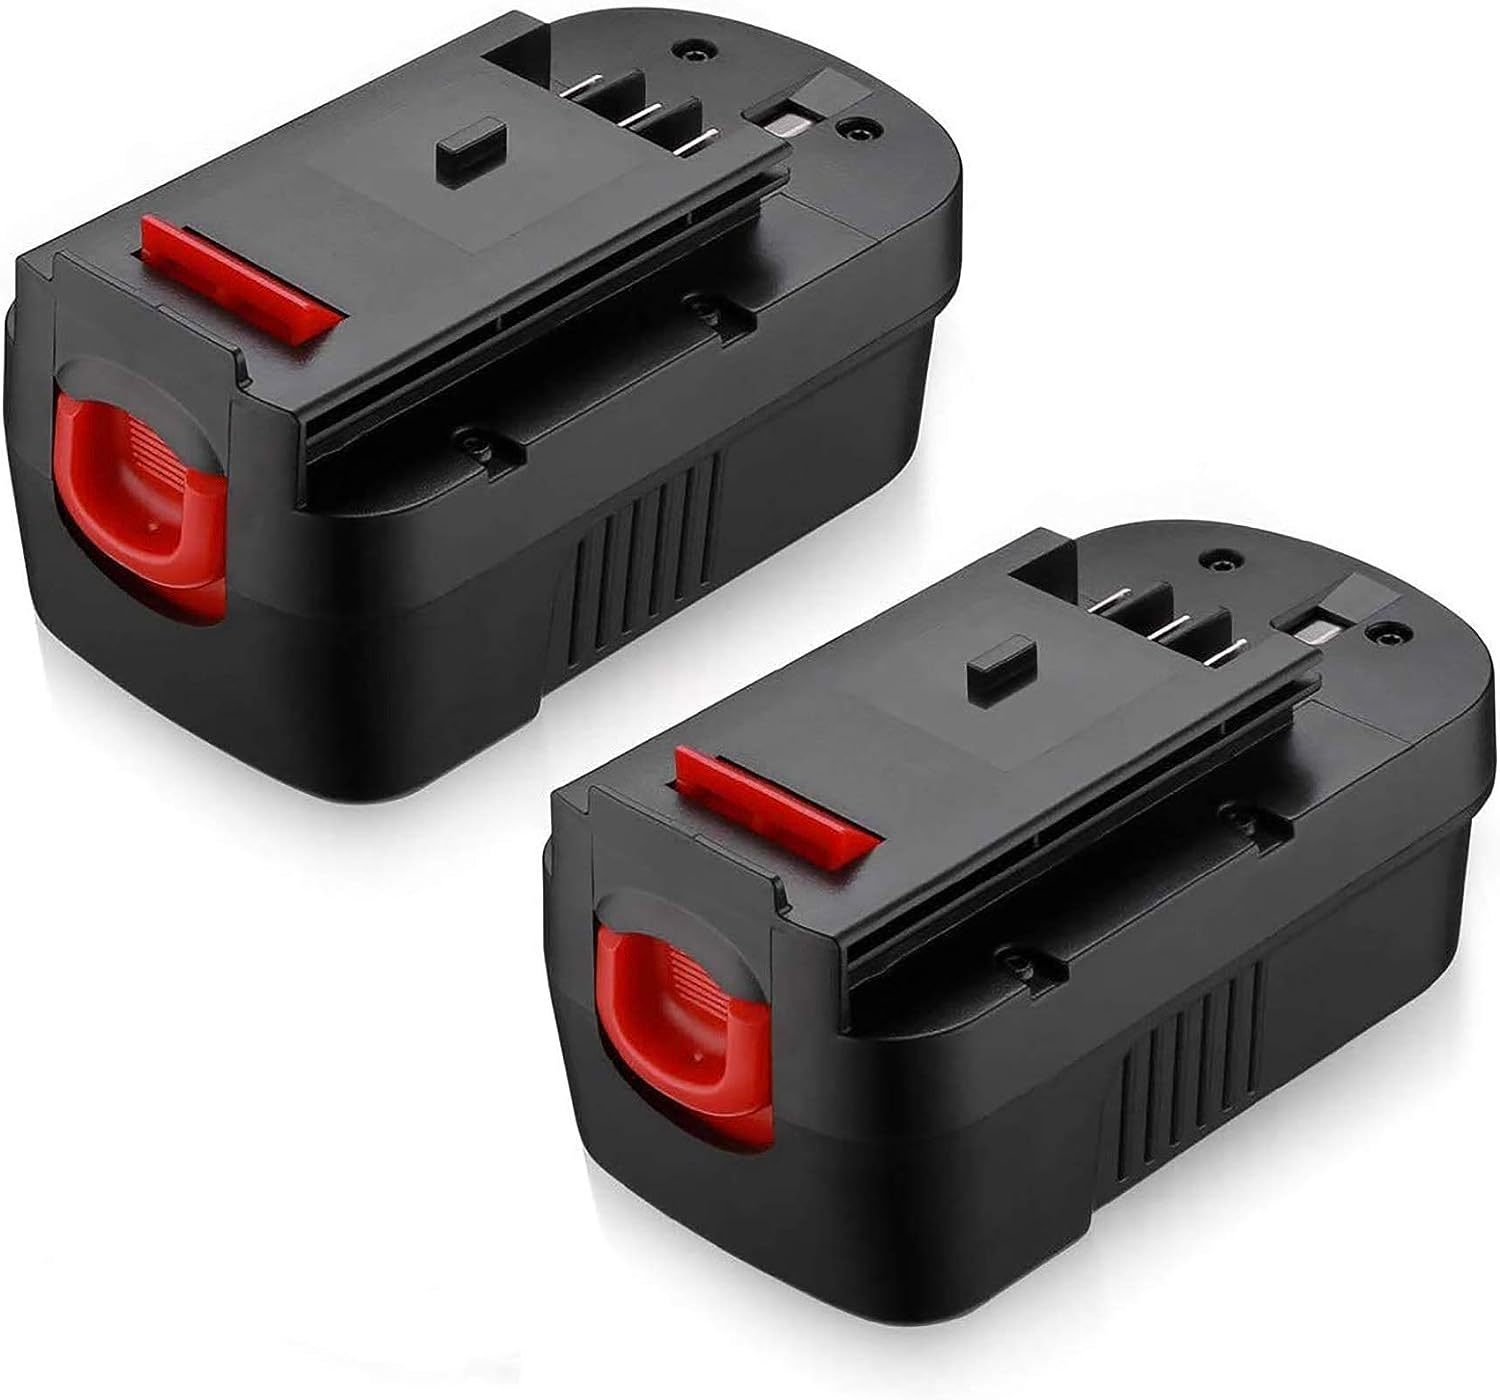  ORHFS Upgraded 2 Pack 20v Max 3600mAh Replace Battery